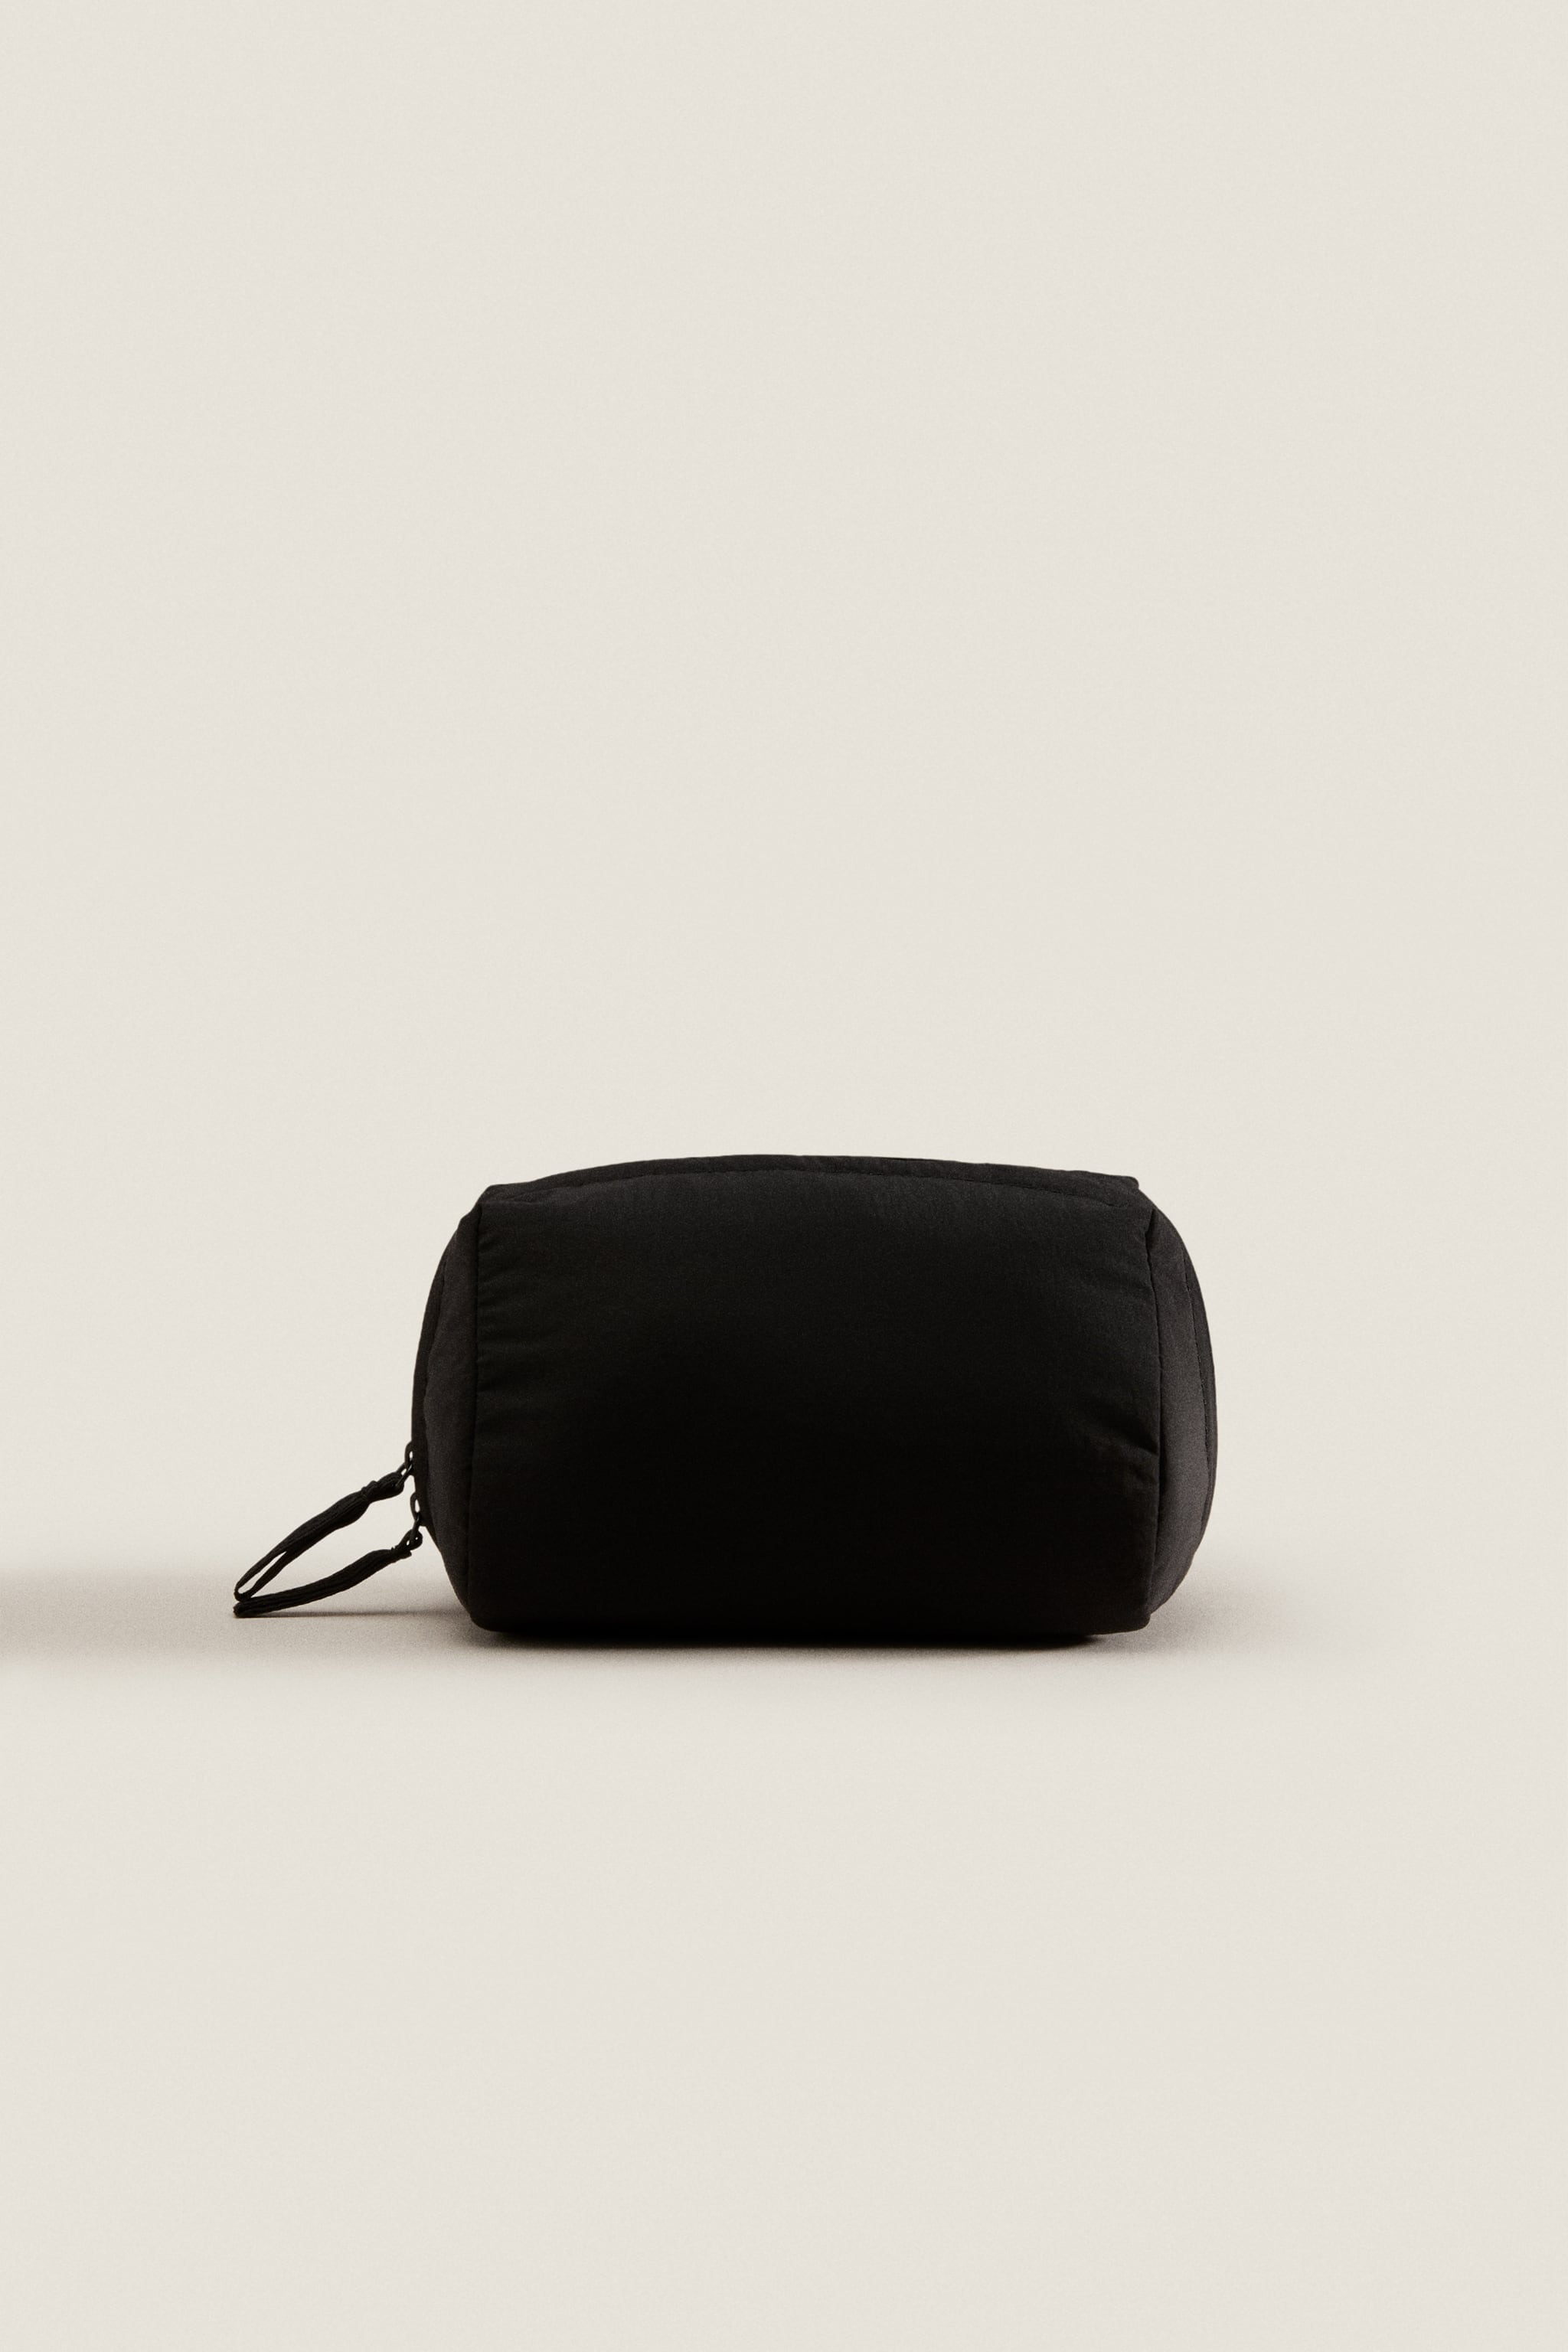 SMALL TECHNICAL FABRIC TOILETRY BAG